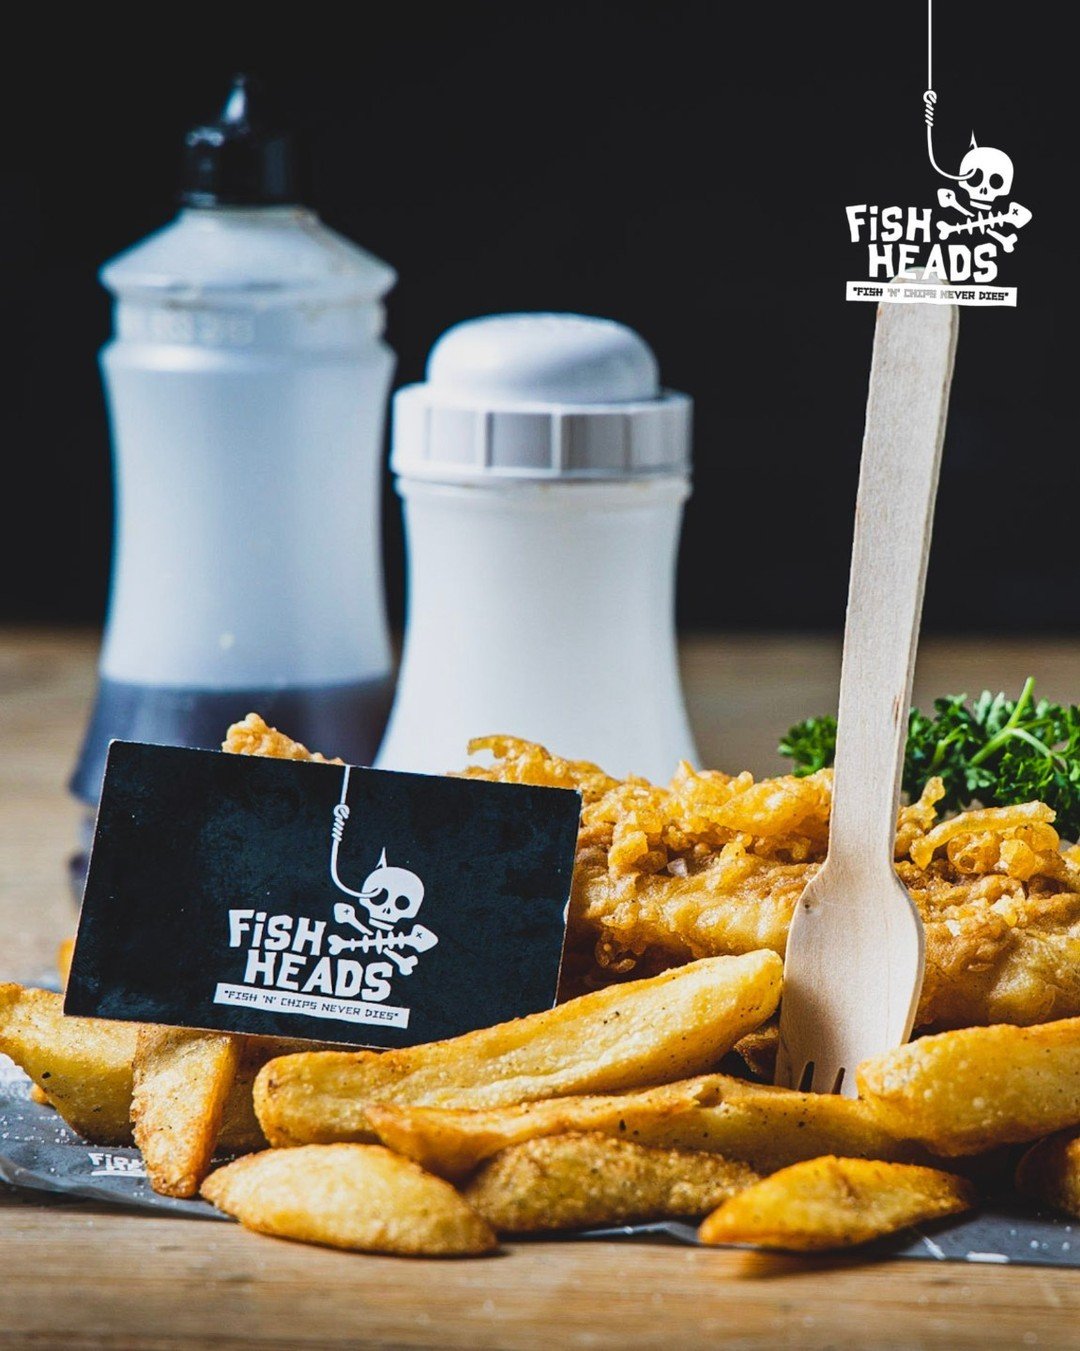 Say &quot;I do&quot; to Fish Heads 🐟💍

Wedding season is here, and we've got your catering covered. Enjoy fresh, delicious food hassle-free while you focus on your special day.

Drop us a message to book or to find out more. 🏴&zwj;☠️

#FishHeads #